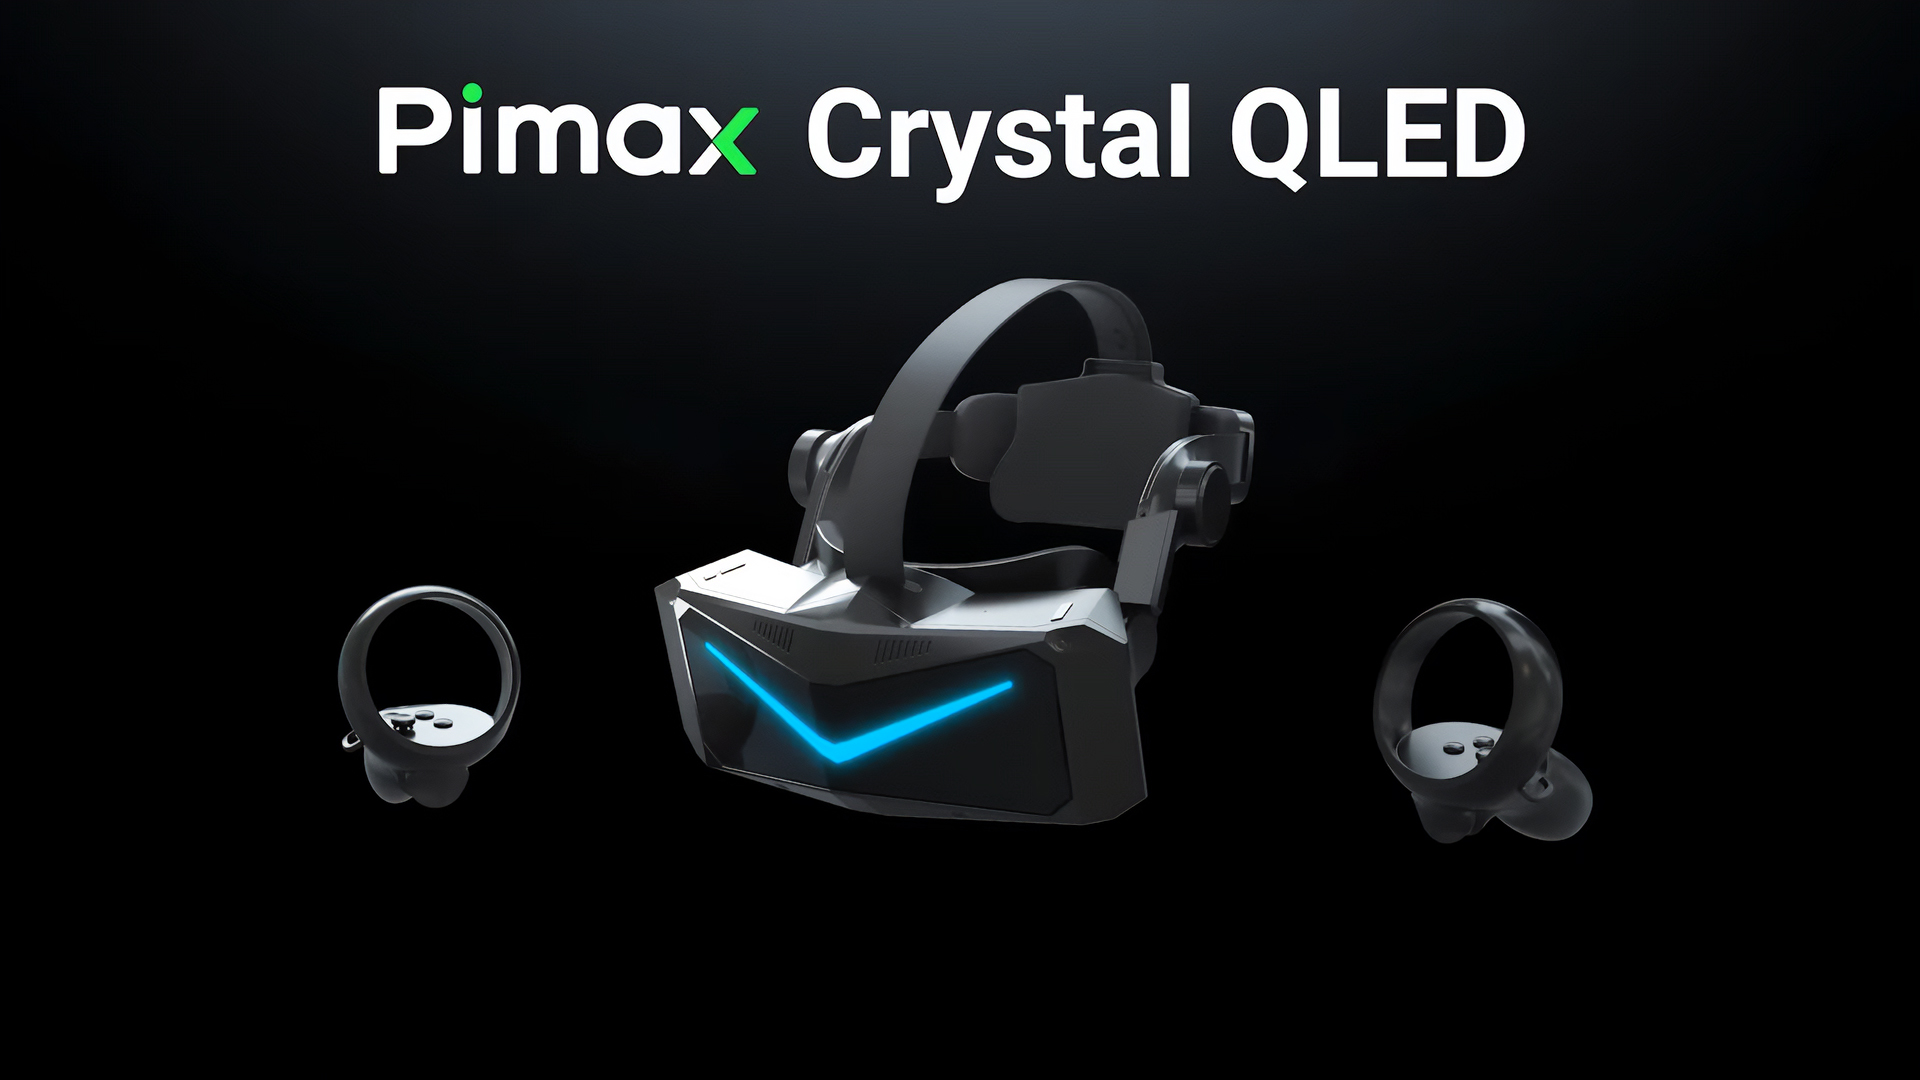 Pimax’s New Headset is Priced & Positioned to Take on Varjo’s Ultra-enthusiast Aero